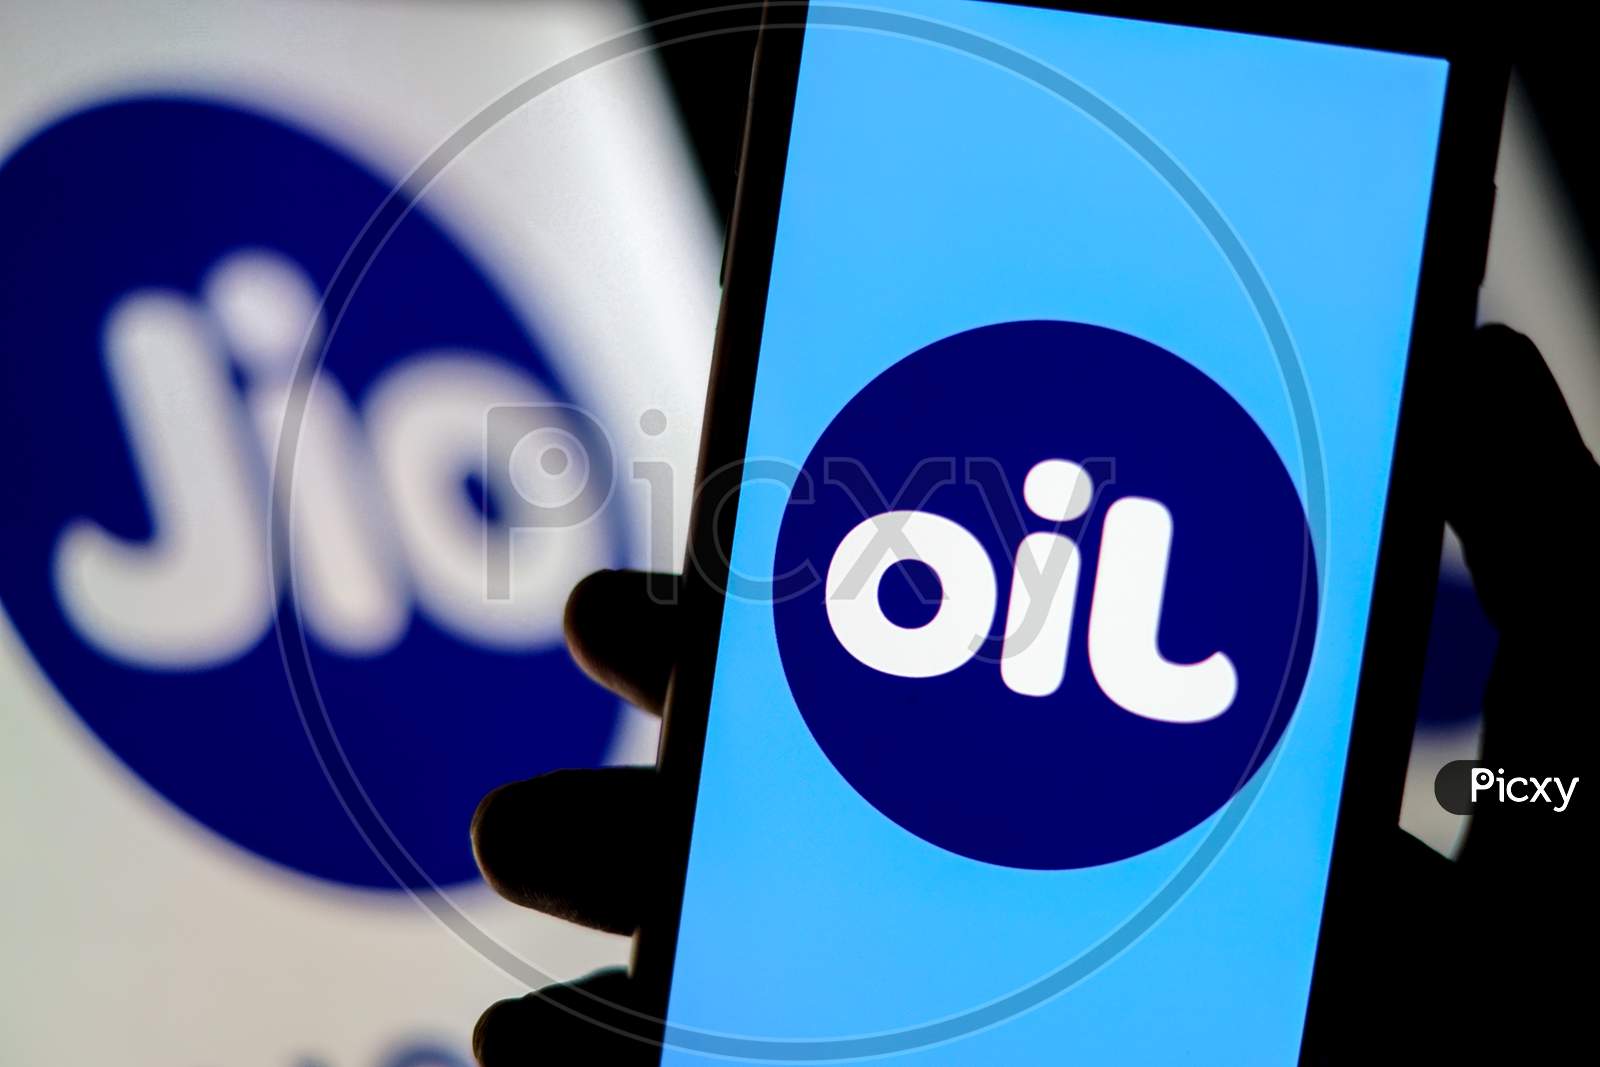 A Flipped Jio Logo as OIL on a Smartphone Screen with Jio Logo in the Background